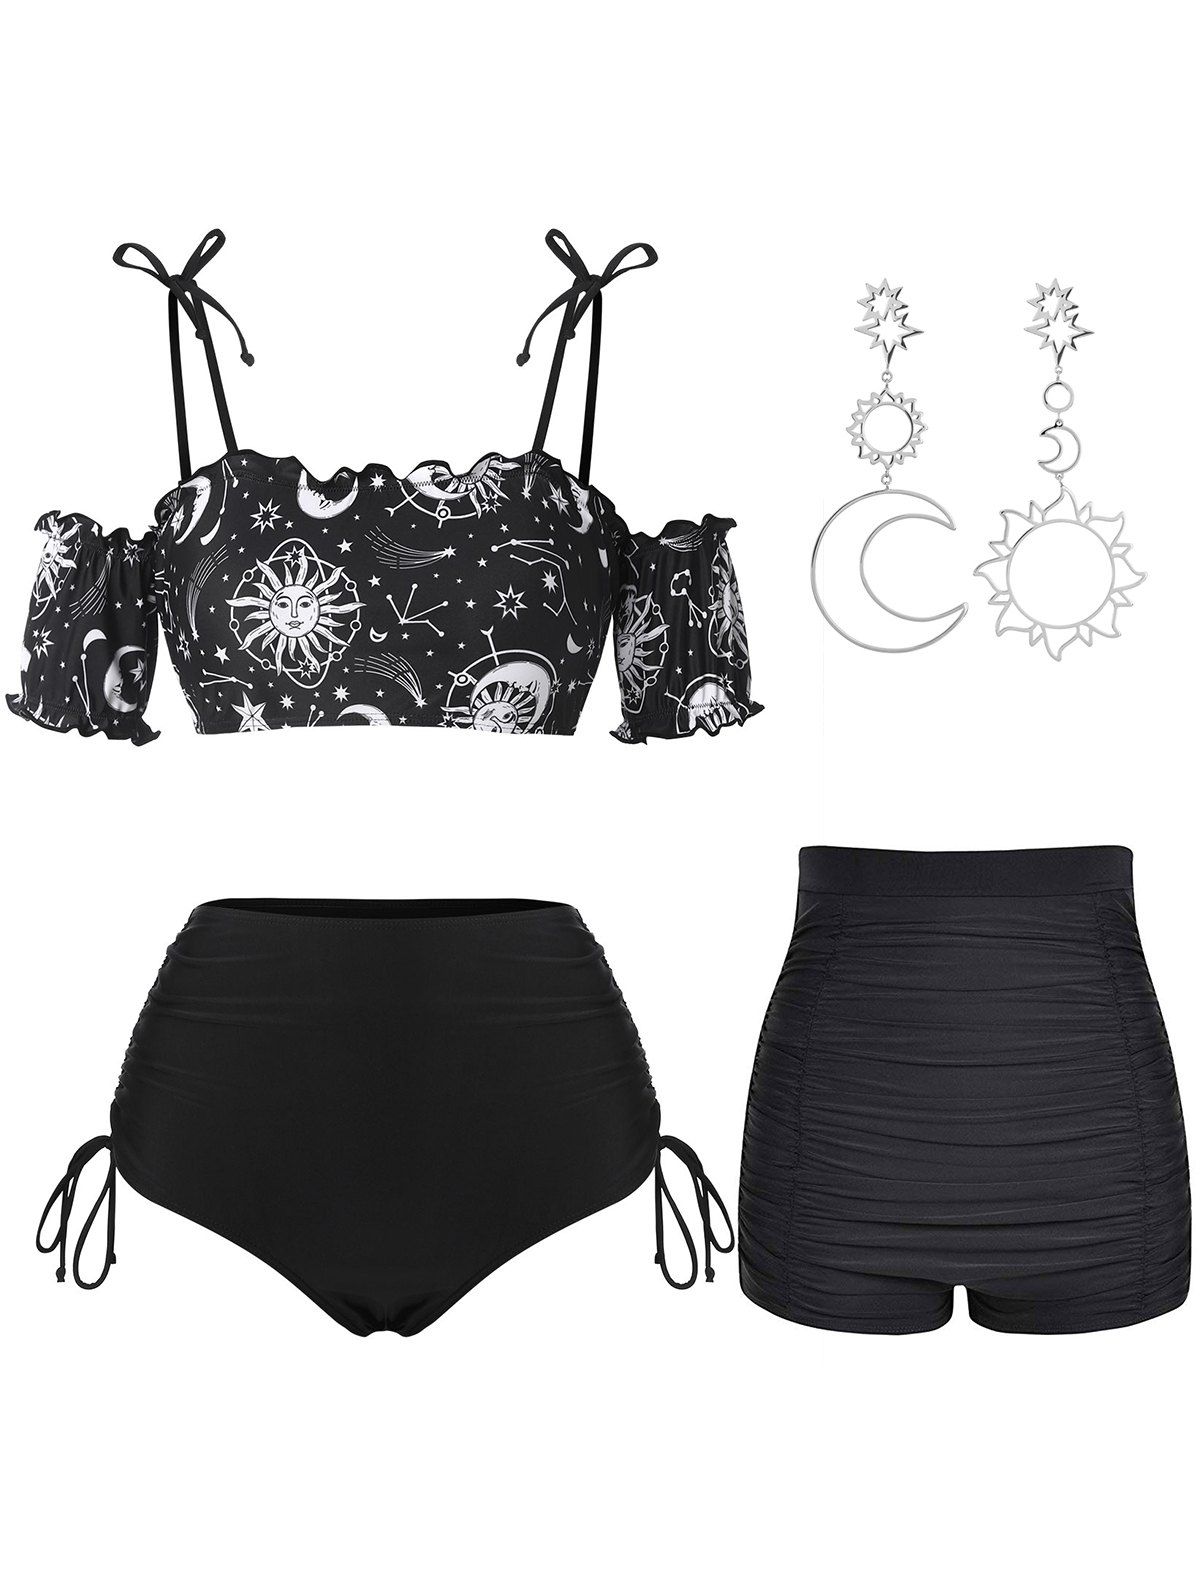 Celestial Sun Moon Print Cinched Tie Swimsuit High Waist Ruched Swim Shorts And Necklace Summer Outfit - BLACK S